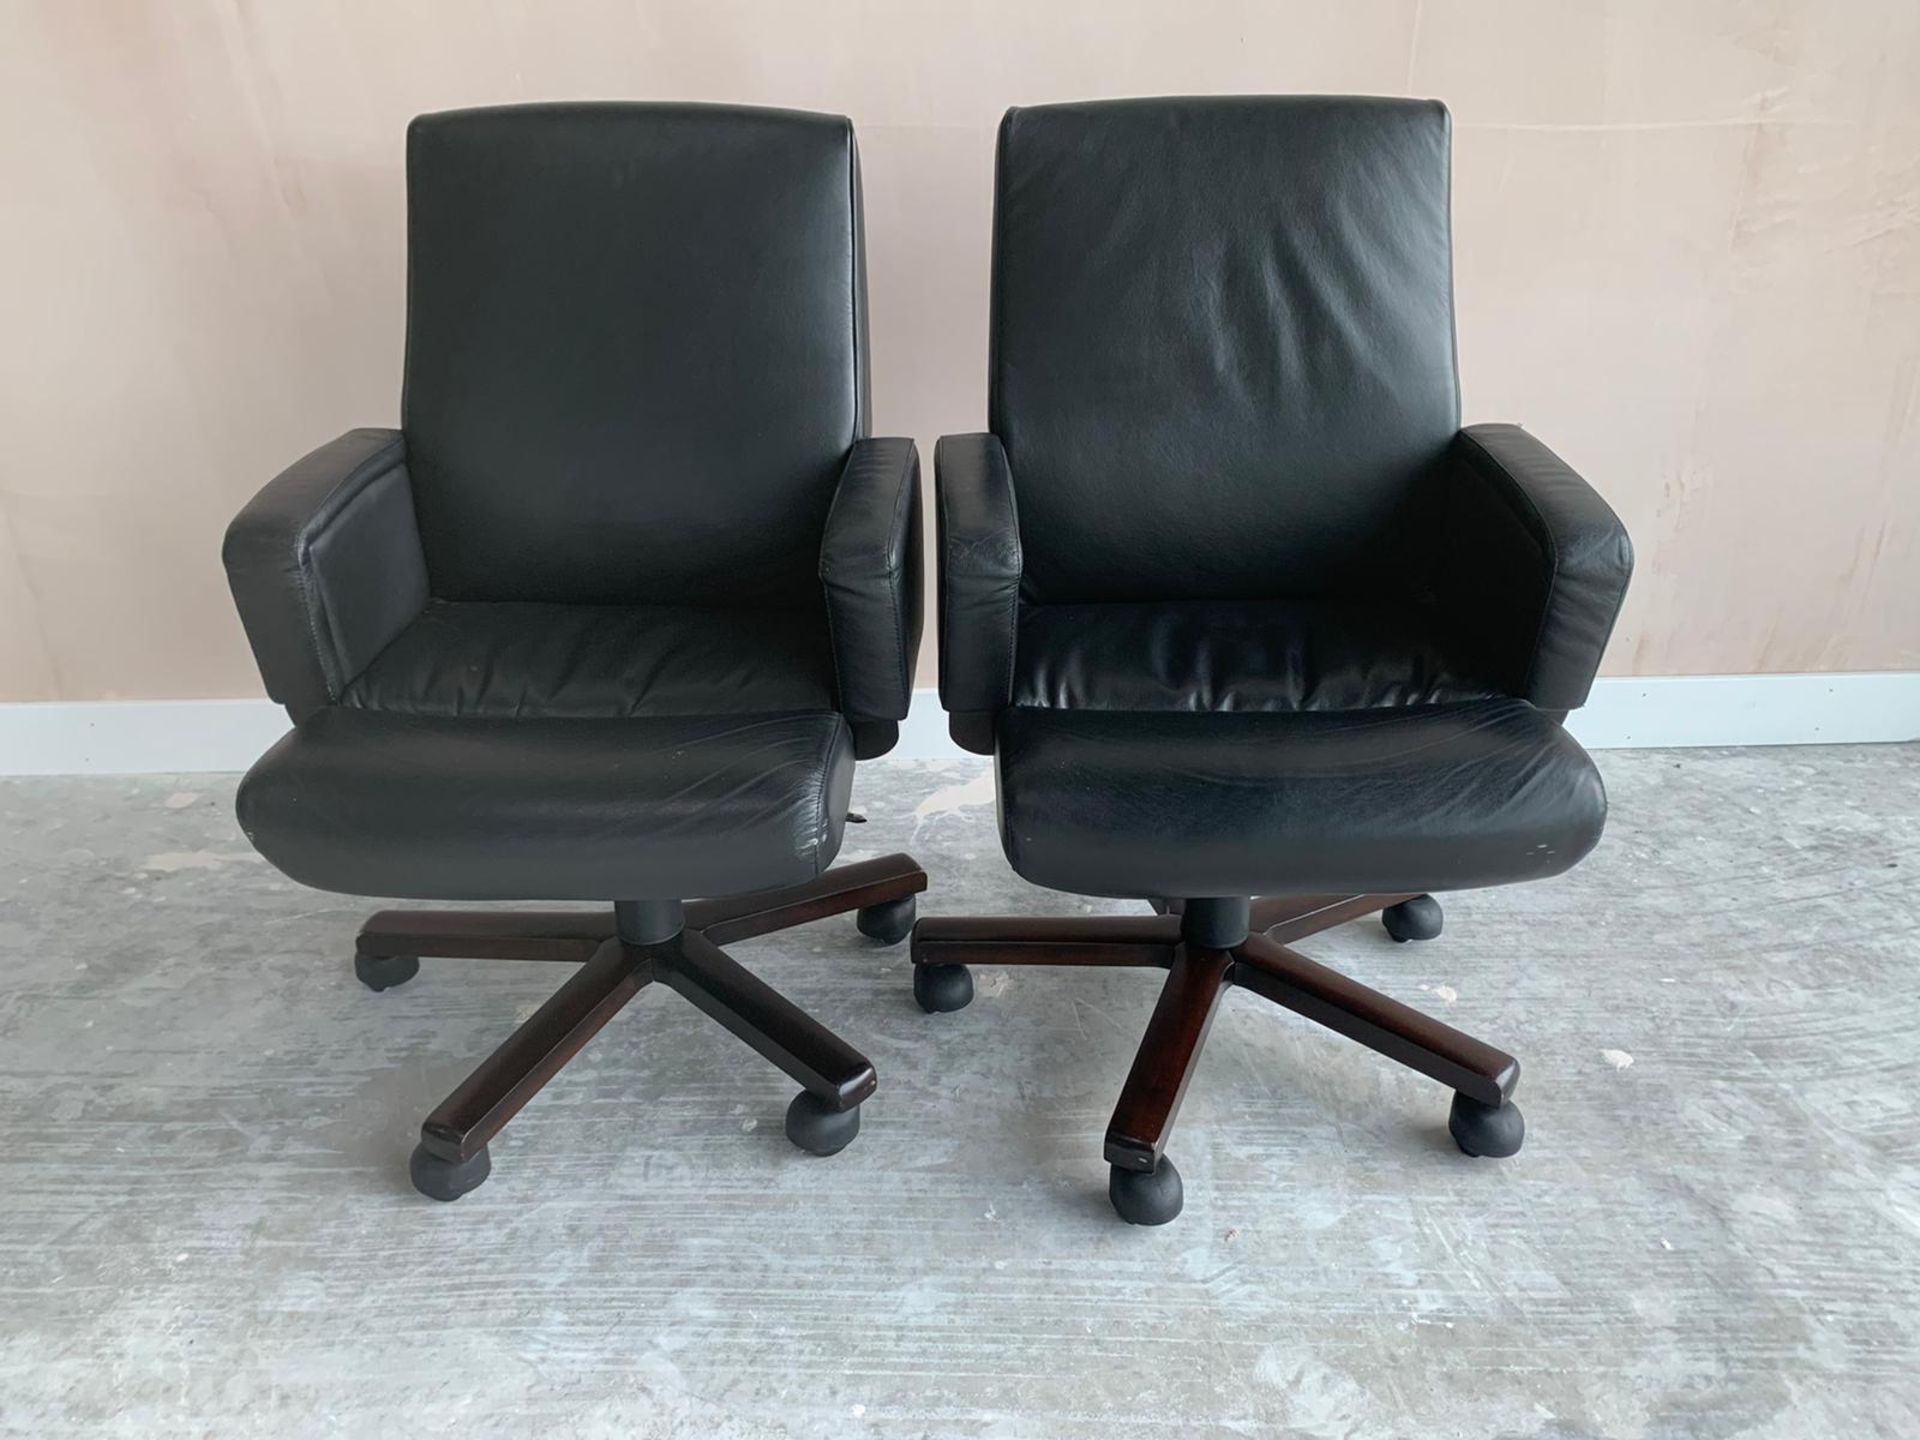 Black Leather Commercial Grade Swivel Office Chair x 2 - Image 2 of 6